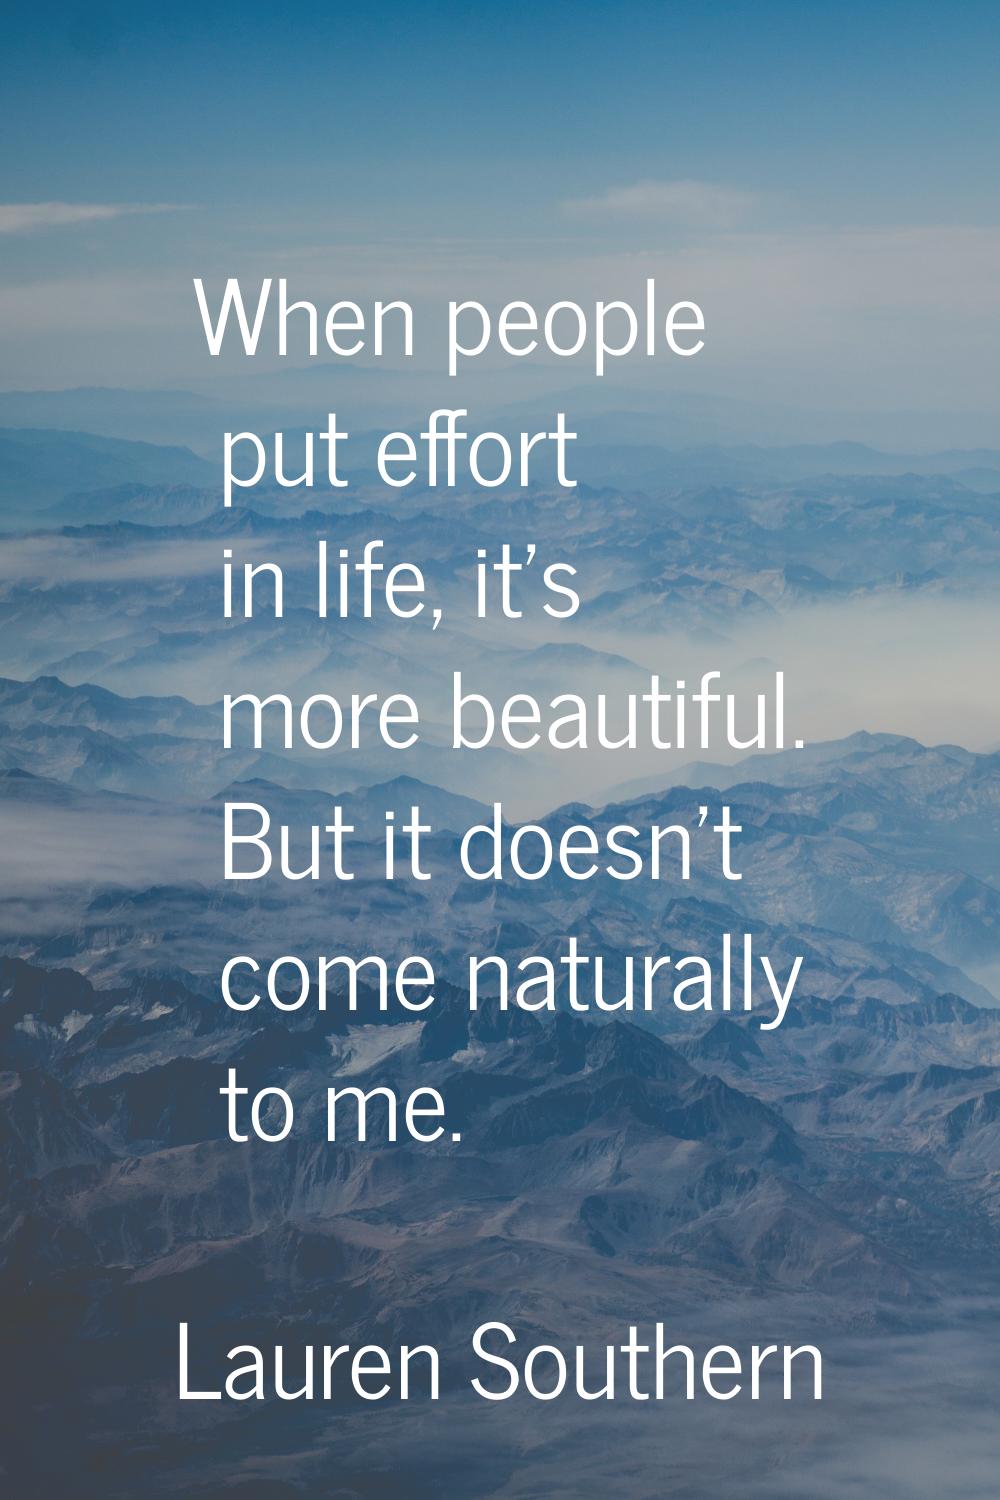 When people put effort in life, it's more beautiful. But it doesn't come naturally to me.